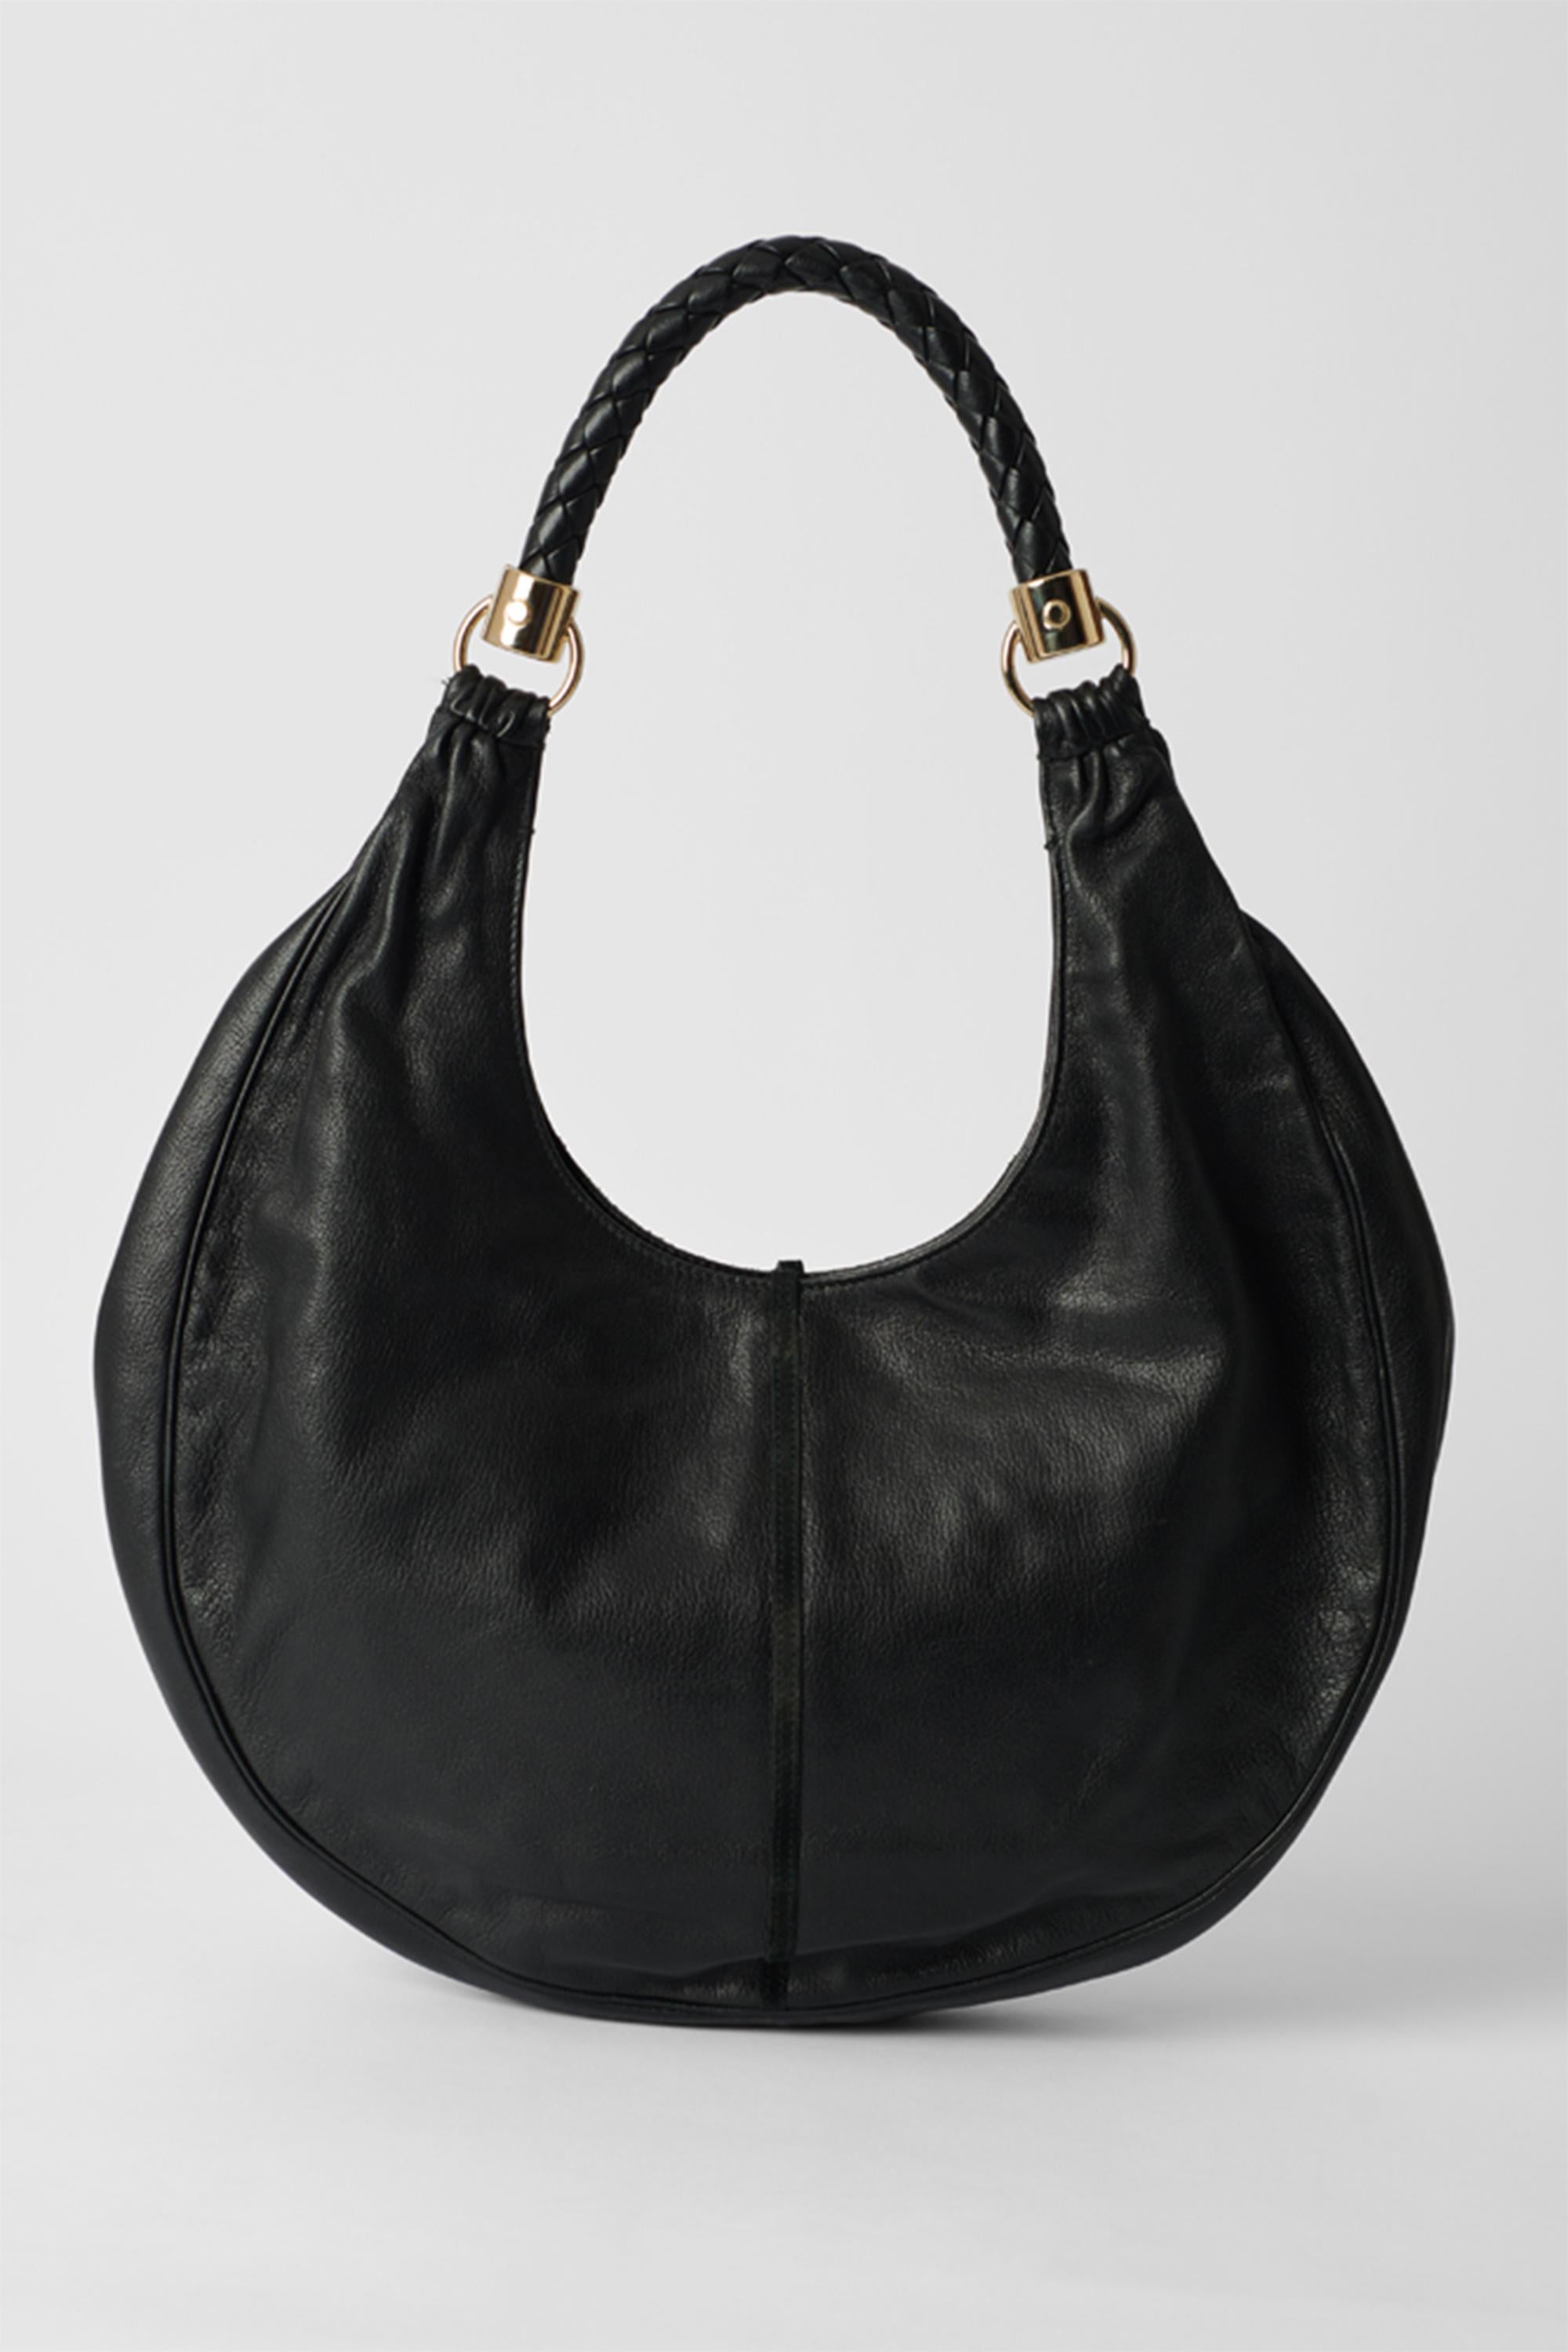 Yves Saint Laurent  Black Leather Hobo Bag with Tassel In Excellent Condition In London, GB